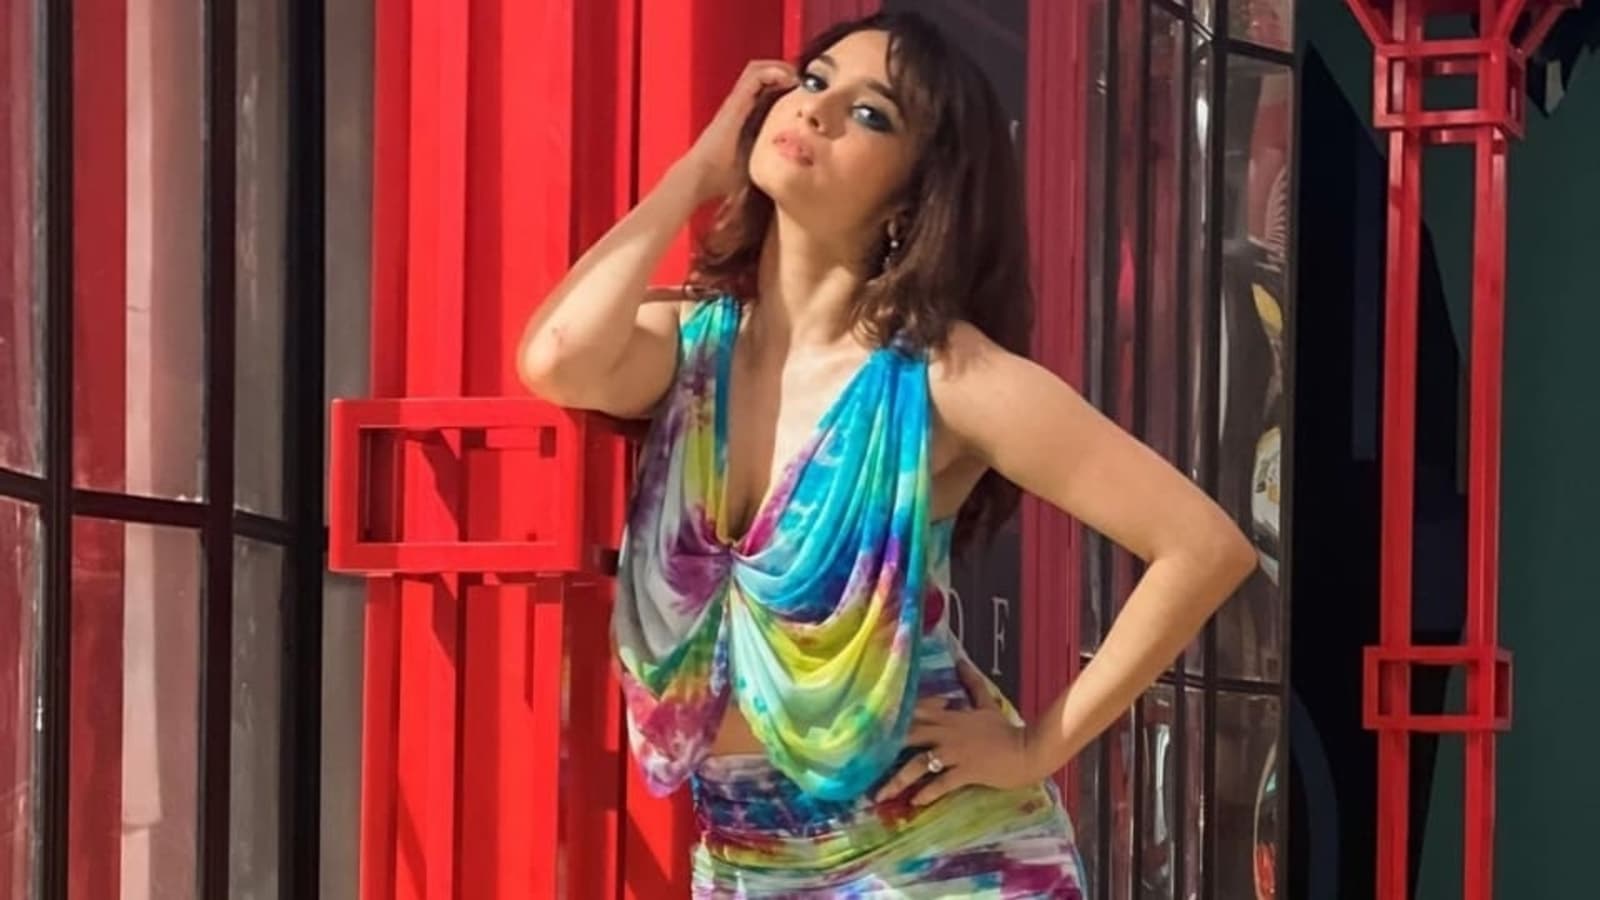 Ankita Lokhande ‘stays colourful’ in mini dress and bold make-up for new photoshoot: See pics here